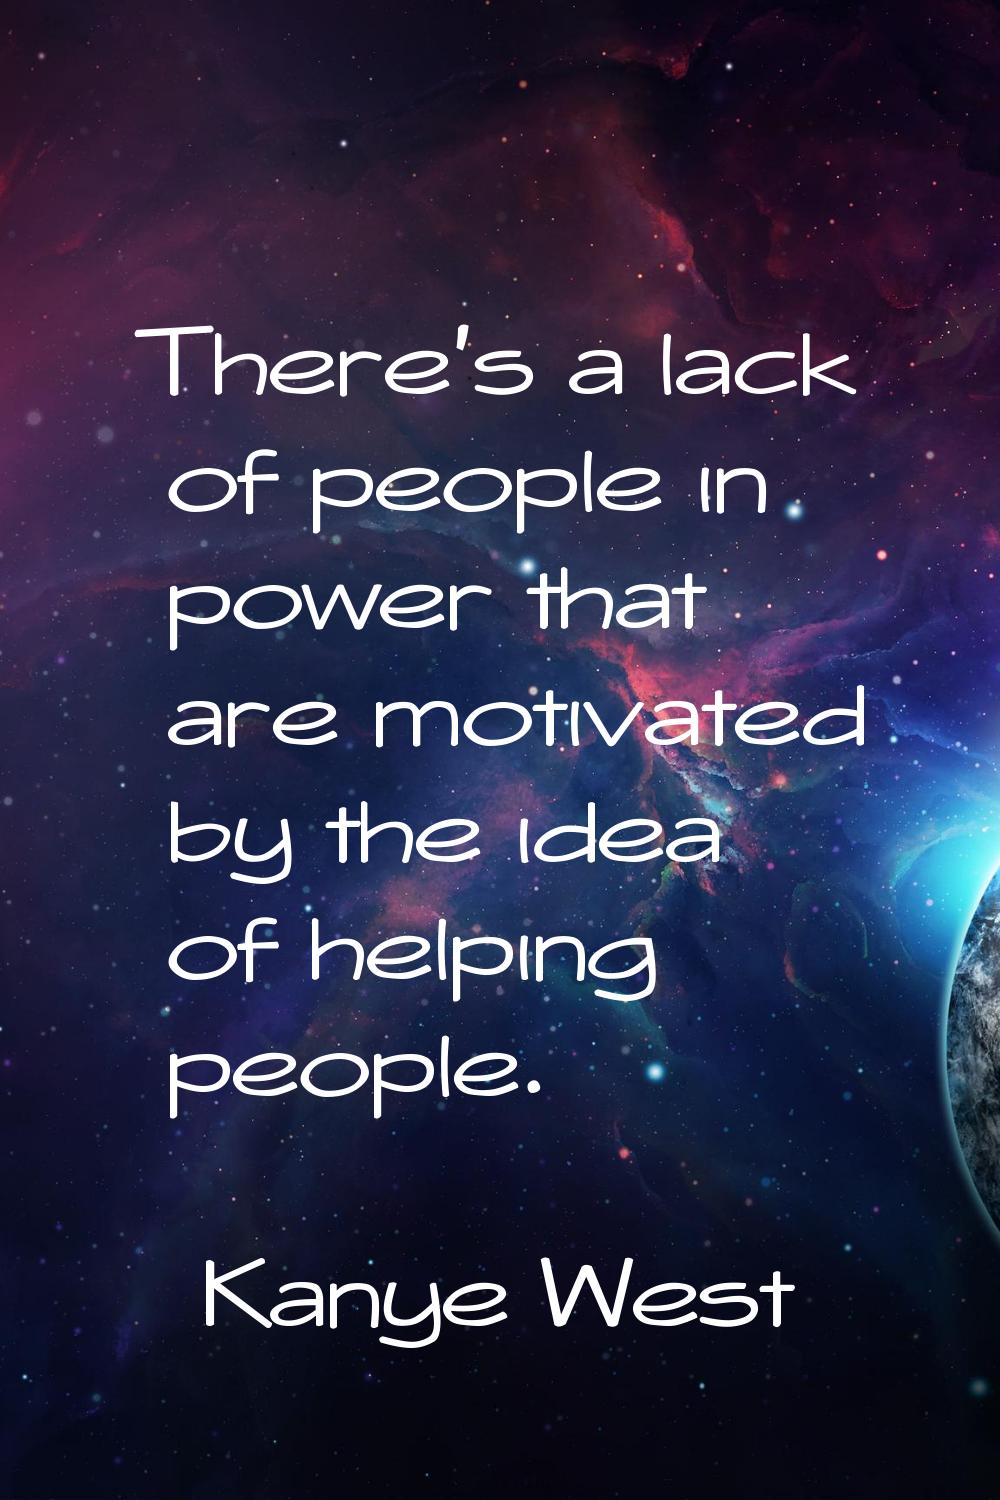 There's a lack of people in power that are motivated by the idea of helping people.